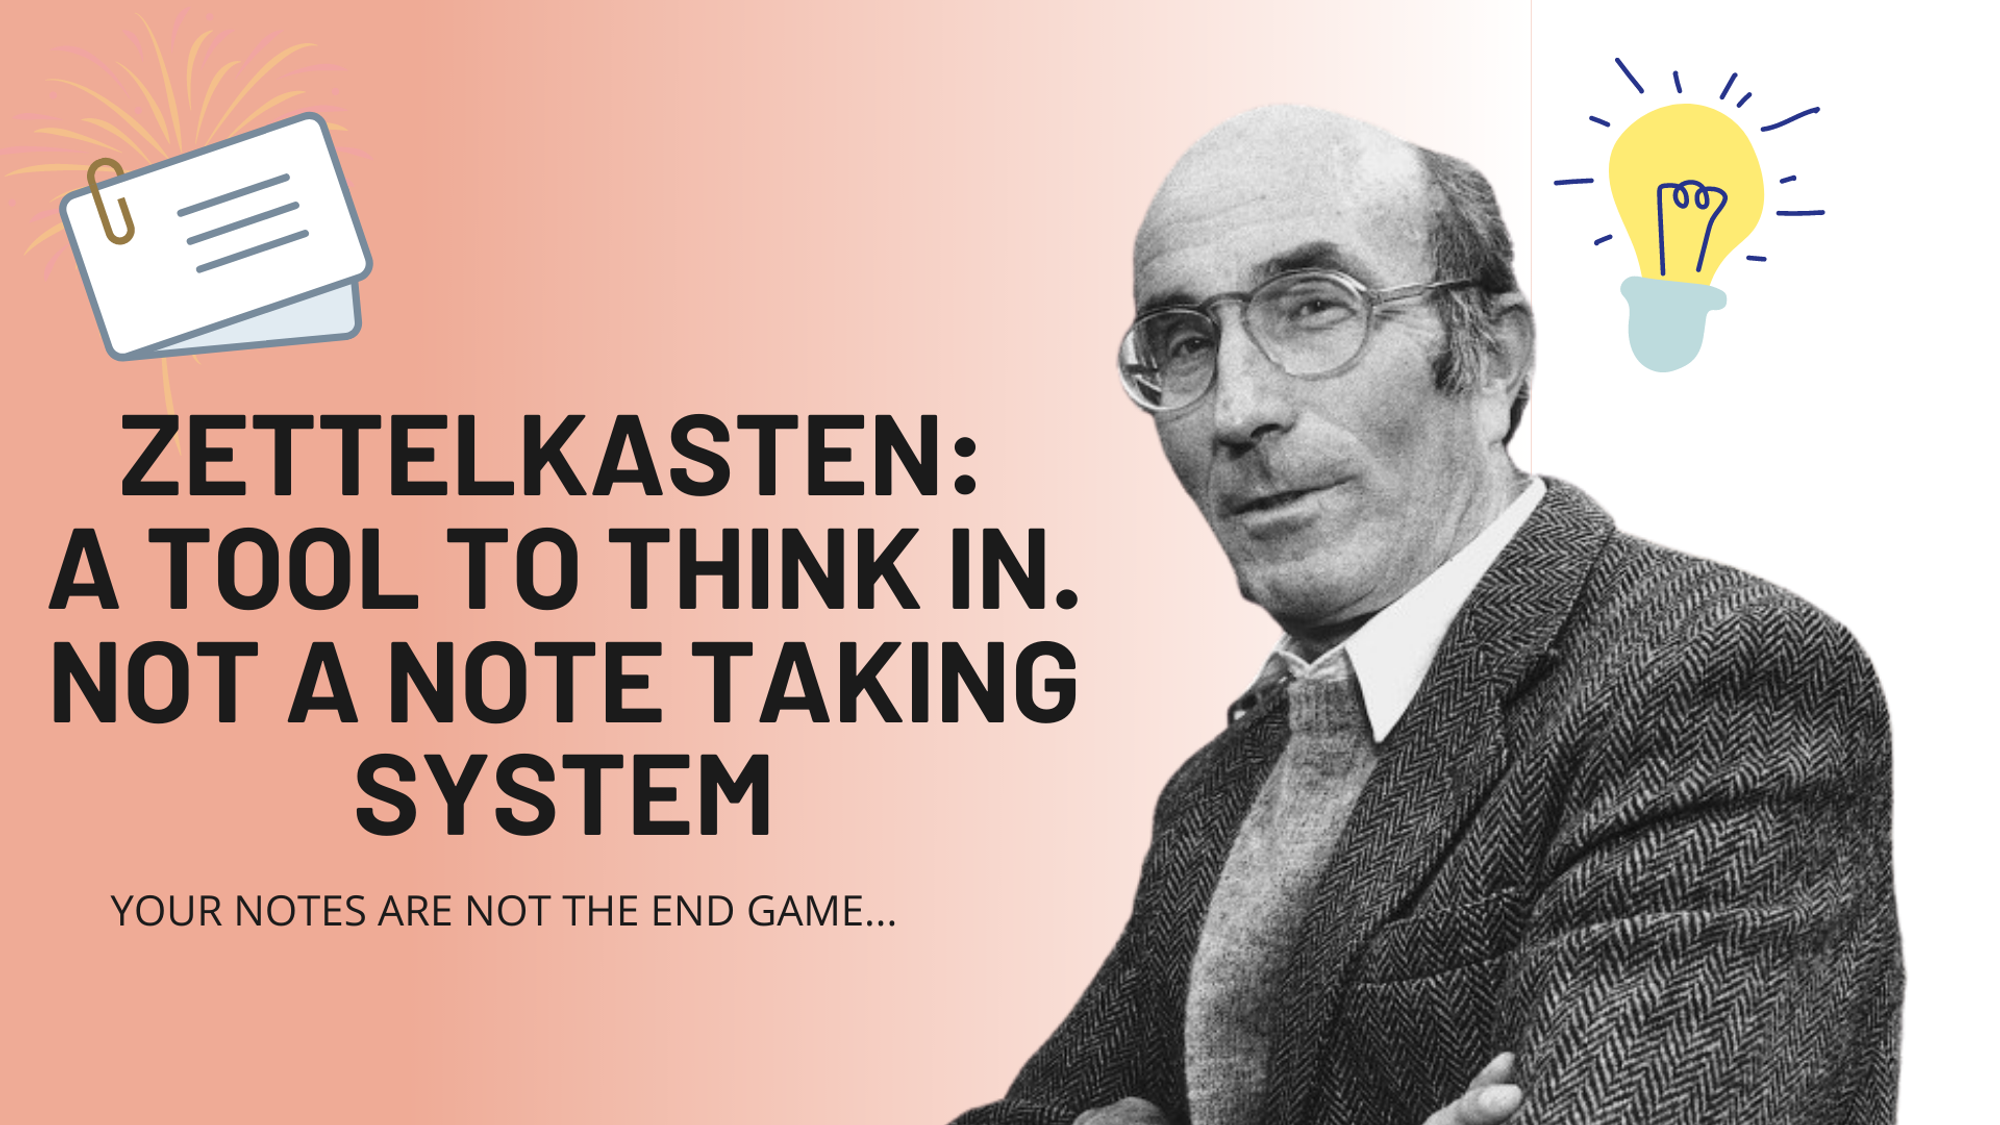 Zettelkasten: A Tool To Think In. Not A Note Taking System